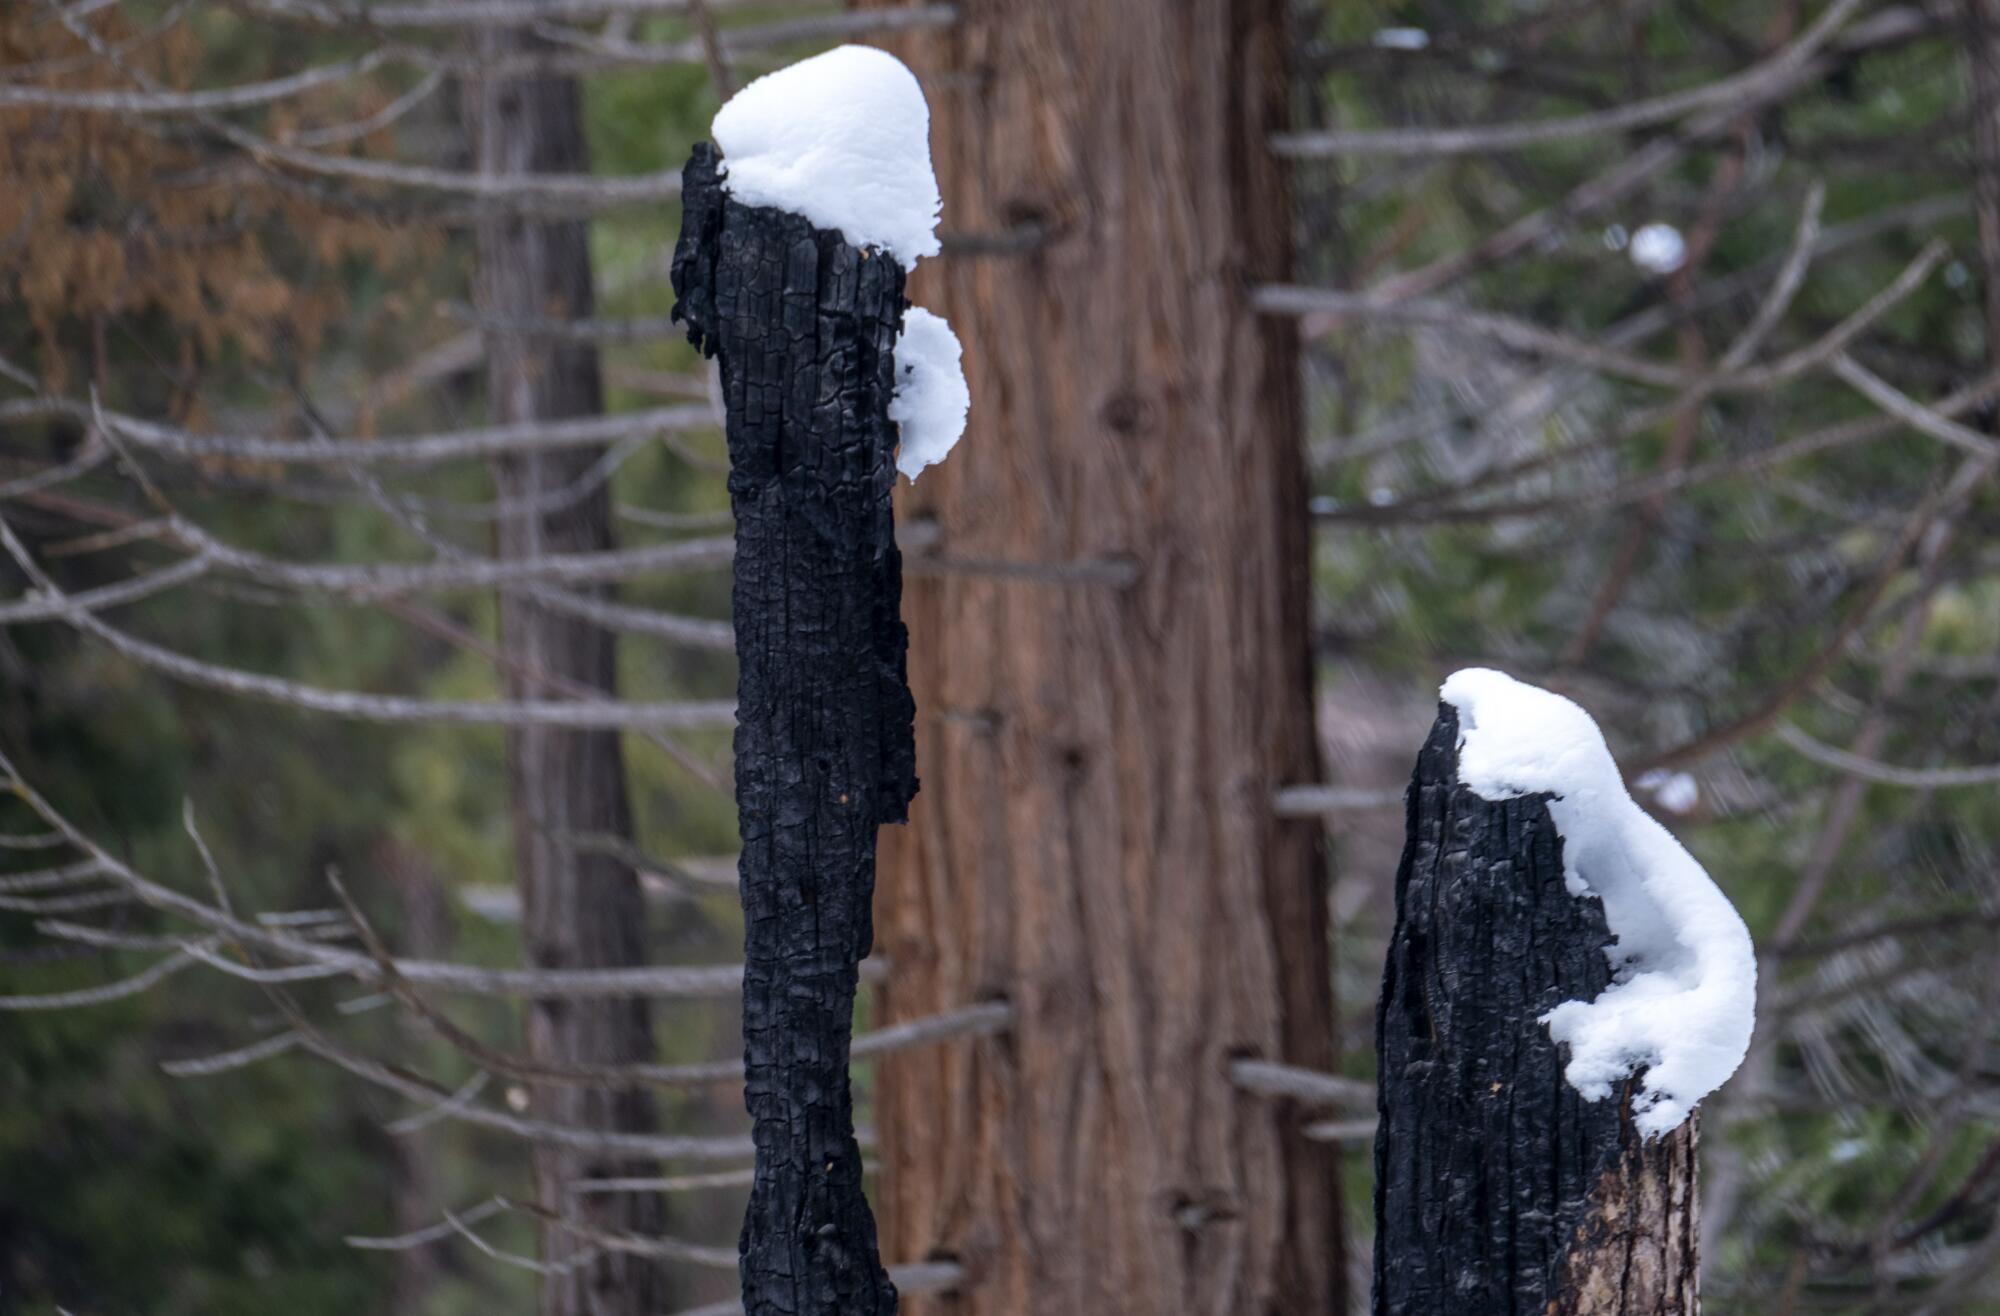 Clumps of snow top the stubs of blackened trees.